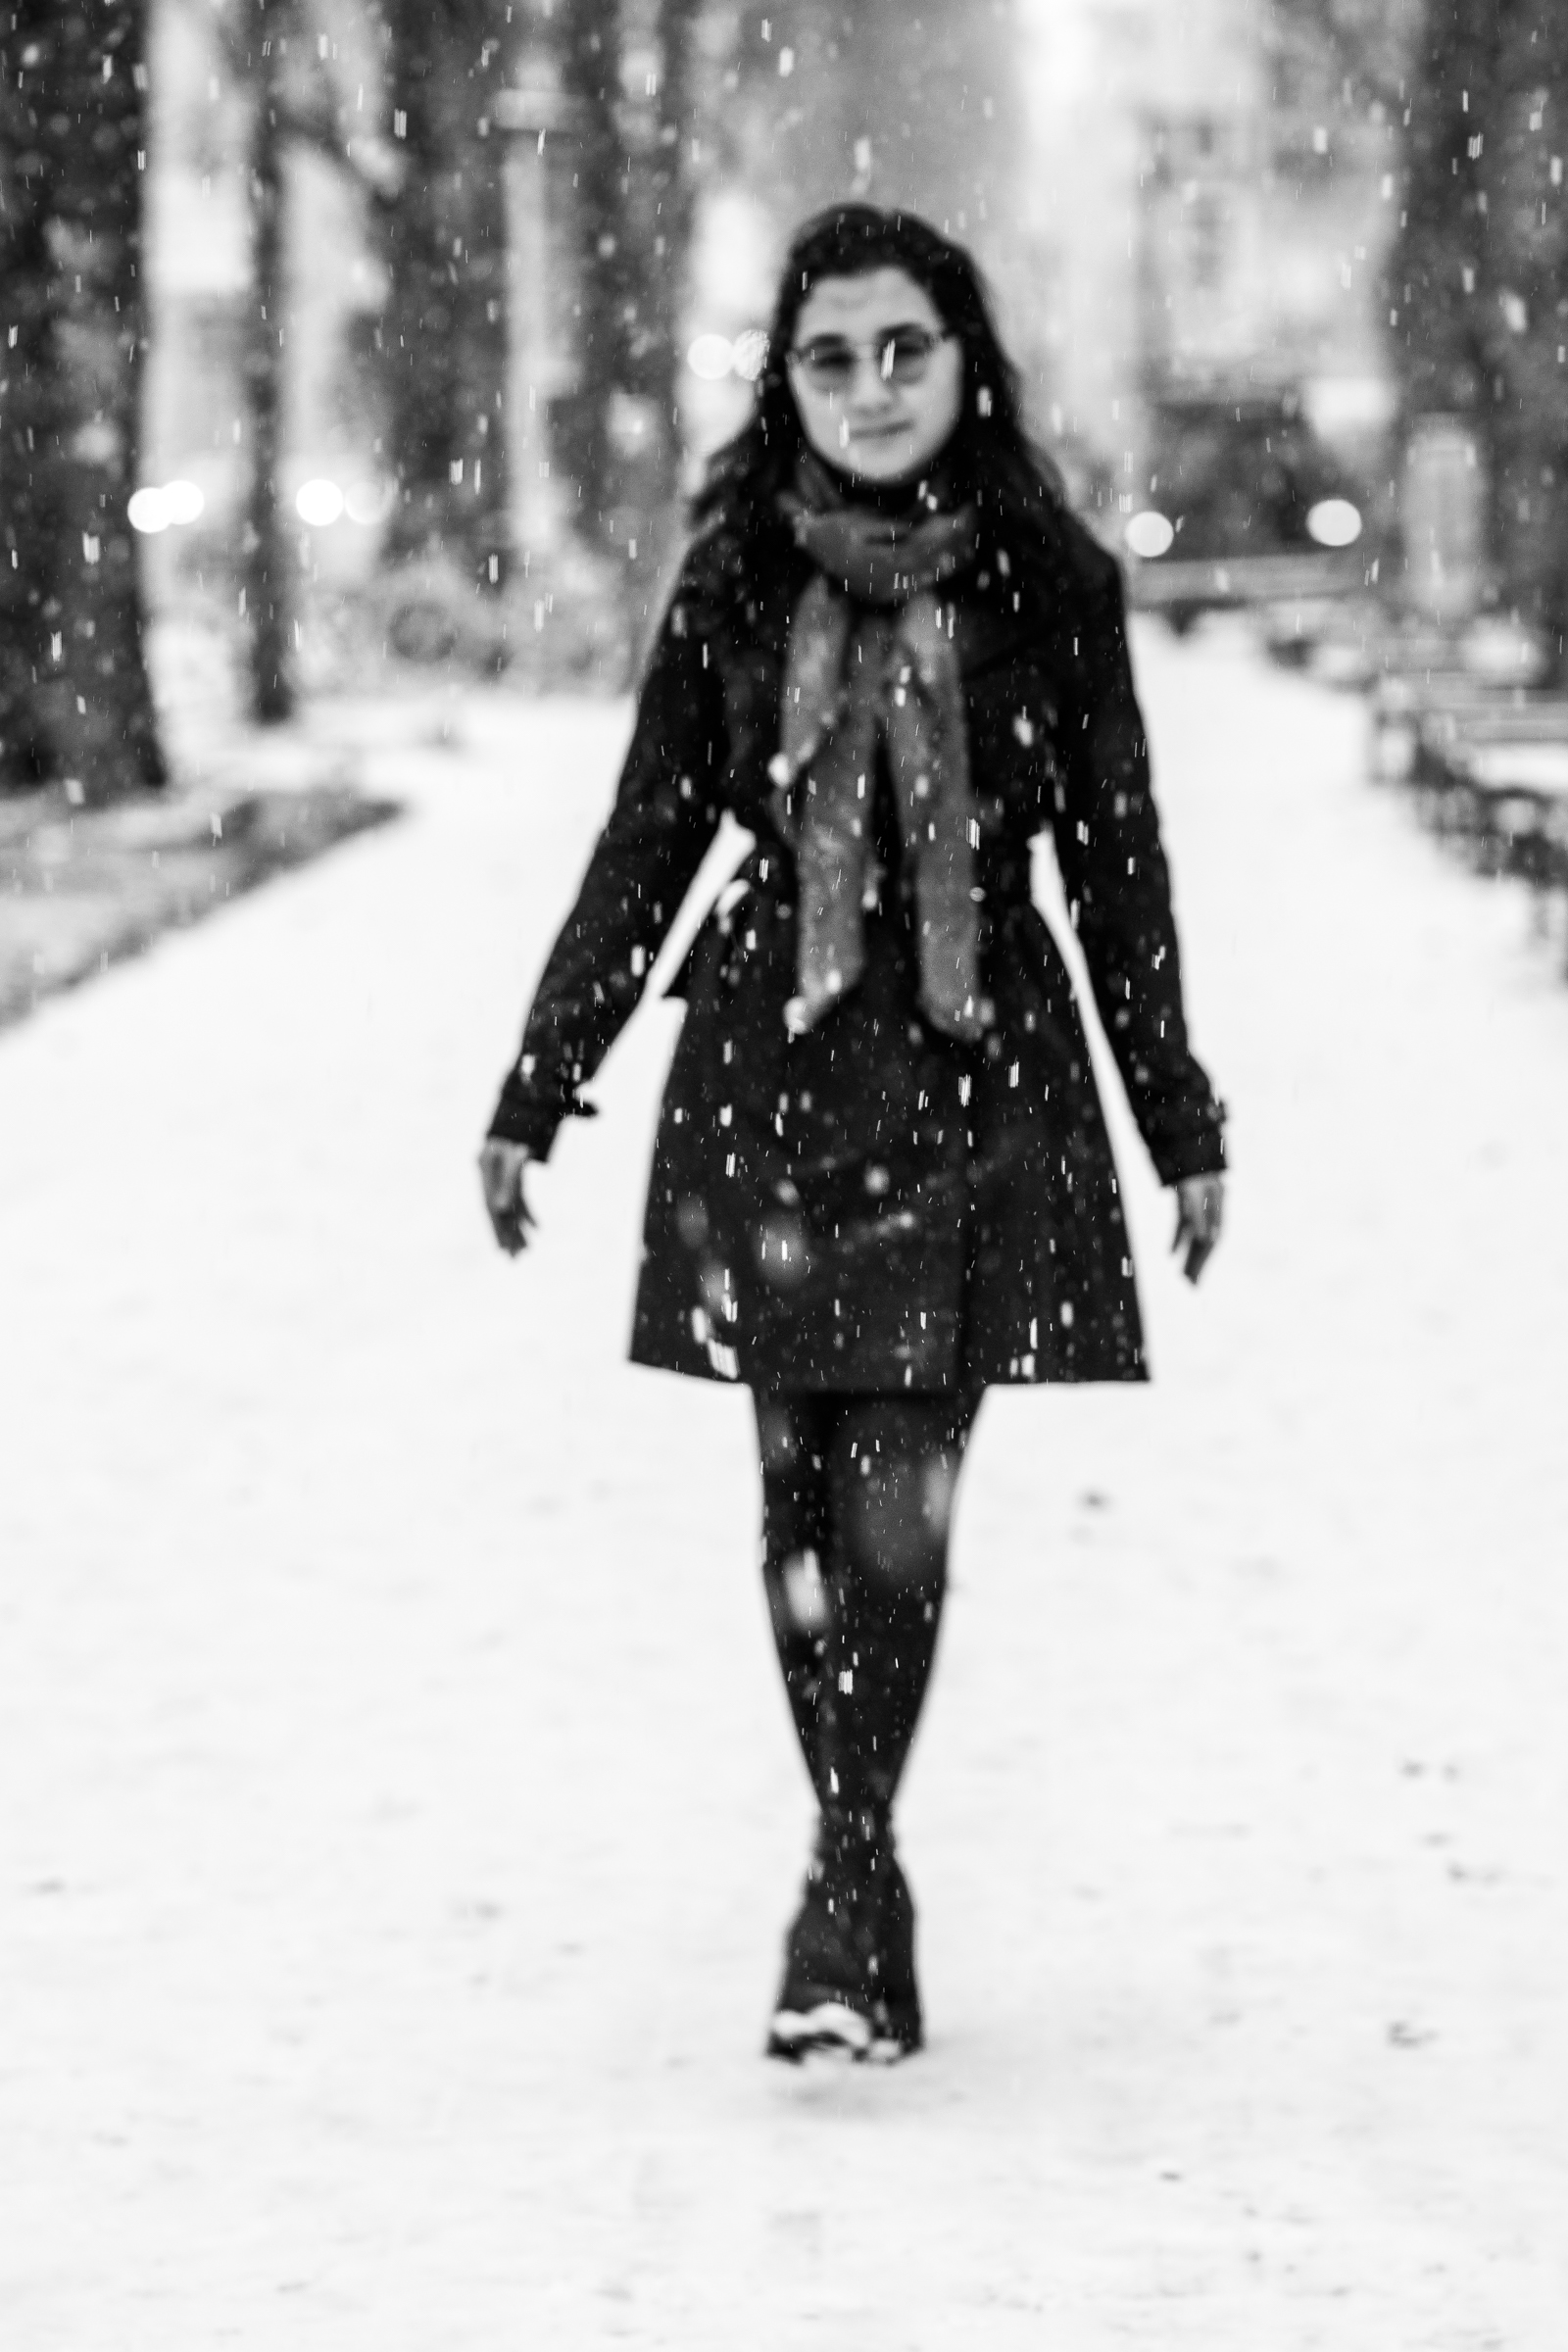 Black-and-white photo of a blurry woman standing with crossed legs amidst falling snow.